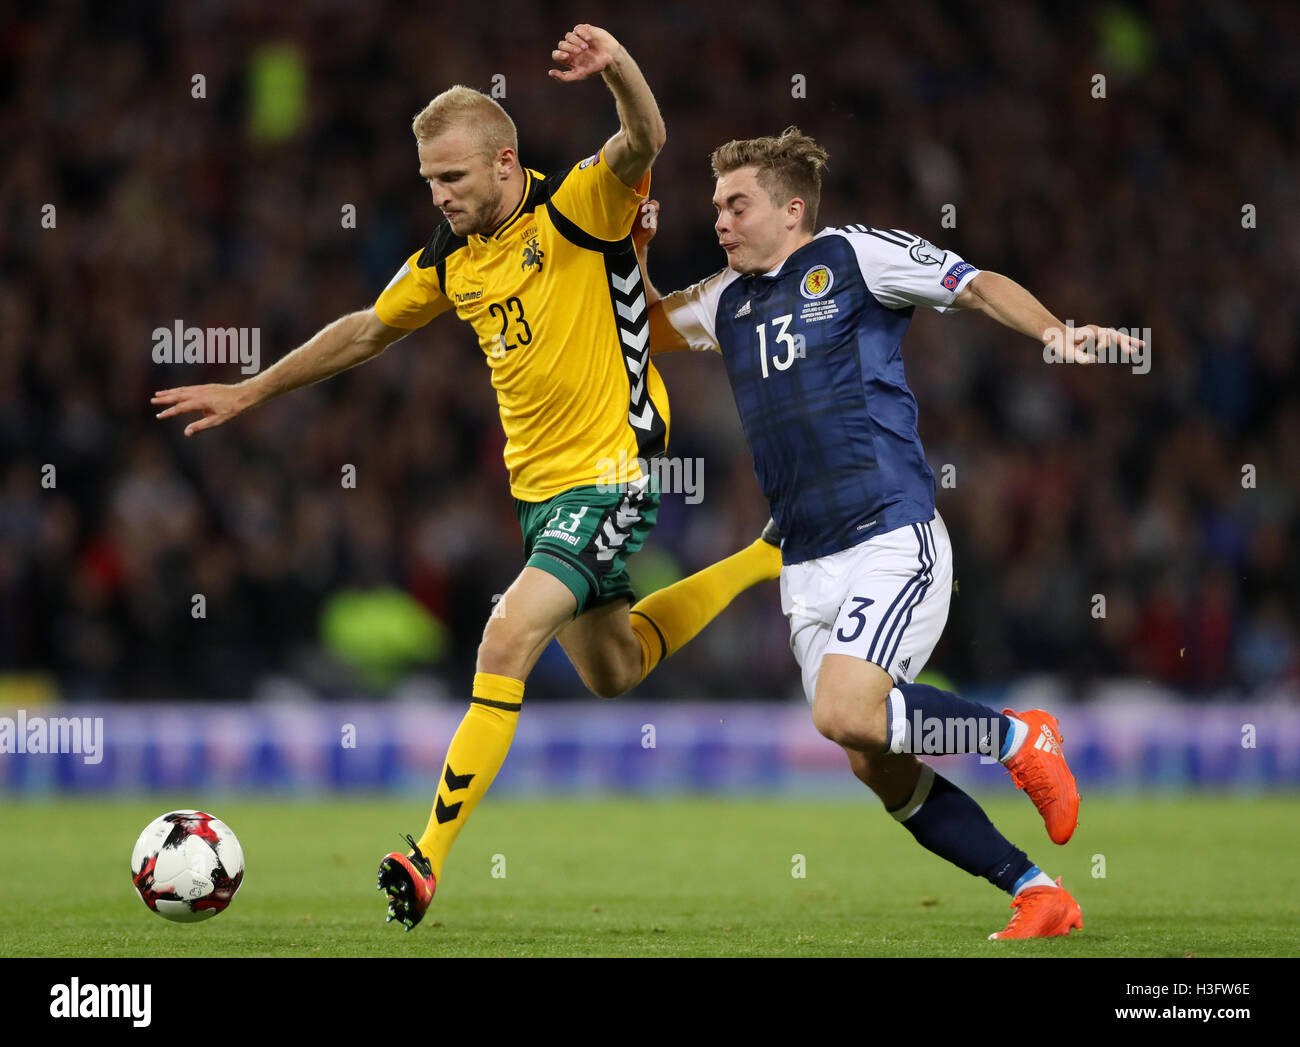 Lithuania's Vytautas Andriuskevicius and Scotland's James Forrest battle for the ball during the 2018 FIFA World Cup Qualifying match at Hampden Park, Glasgow. Stock Photo